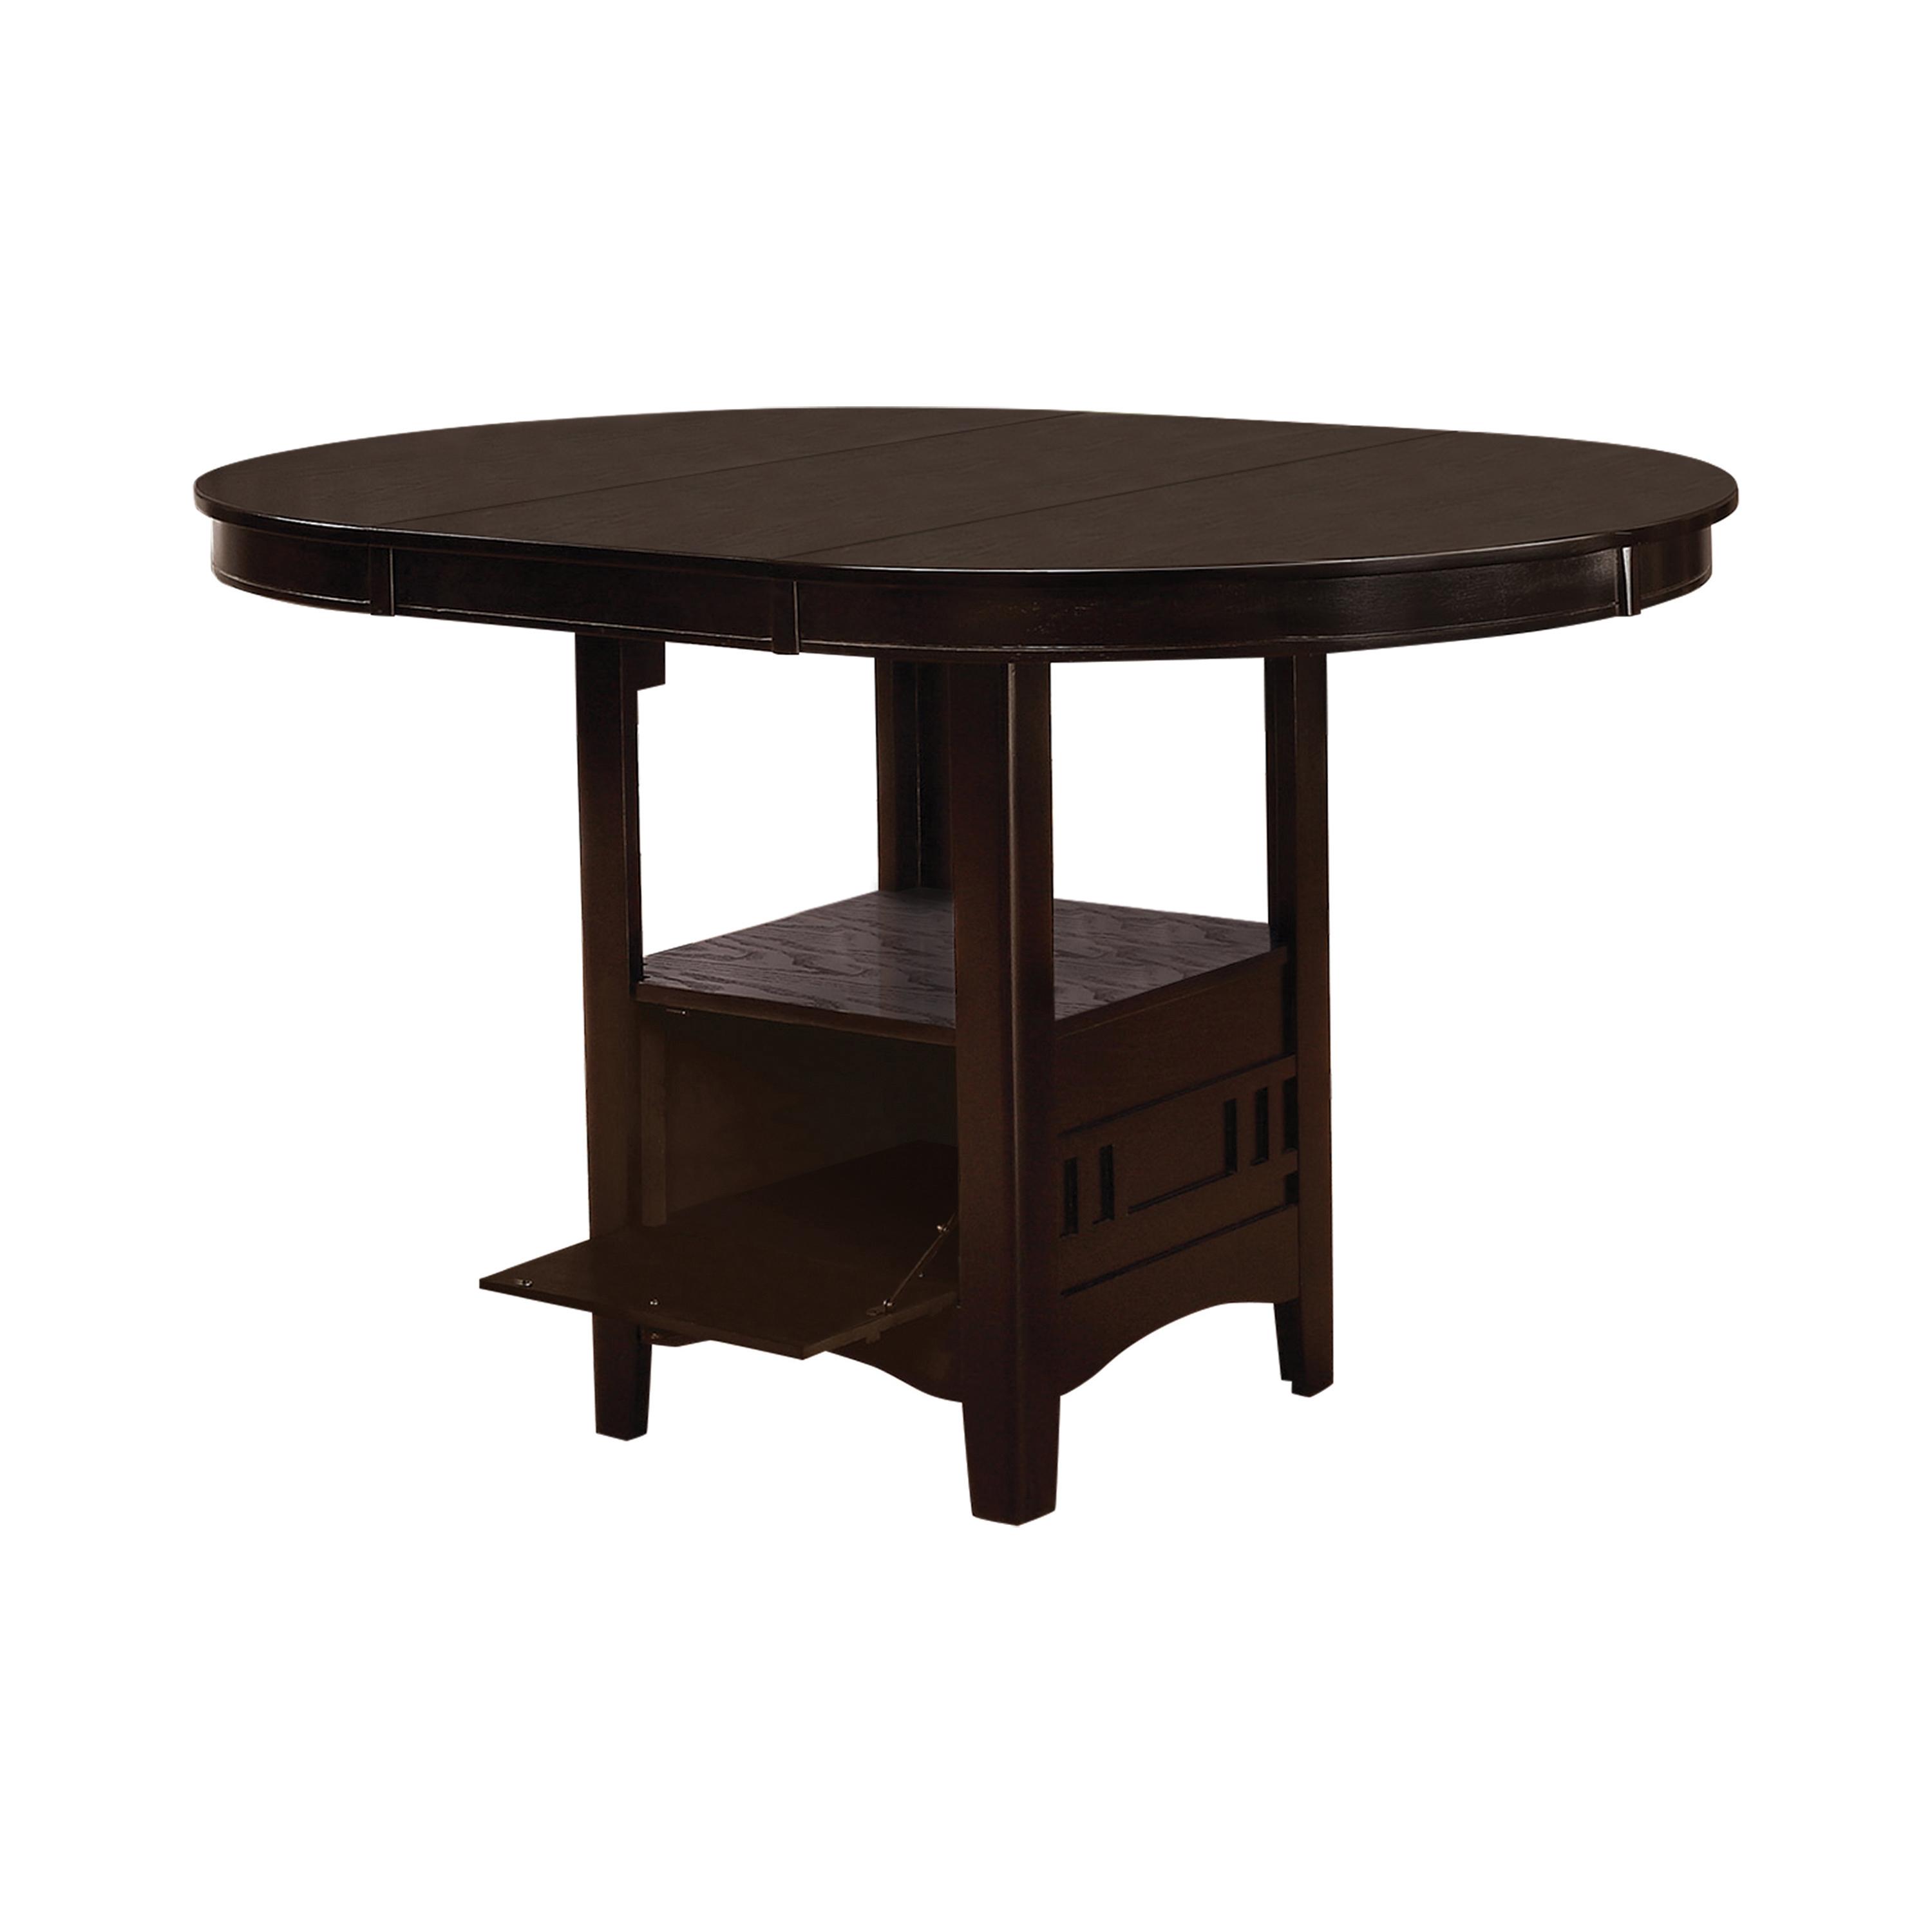 Transitional Counter Height Table 102888 Lavon 102888 in Espresso 